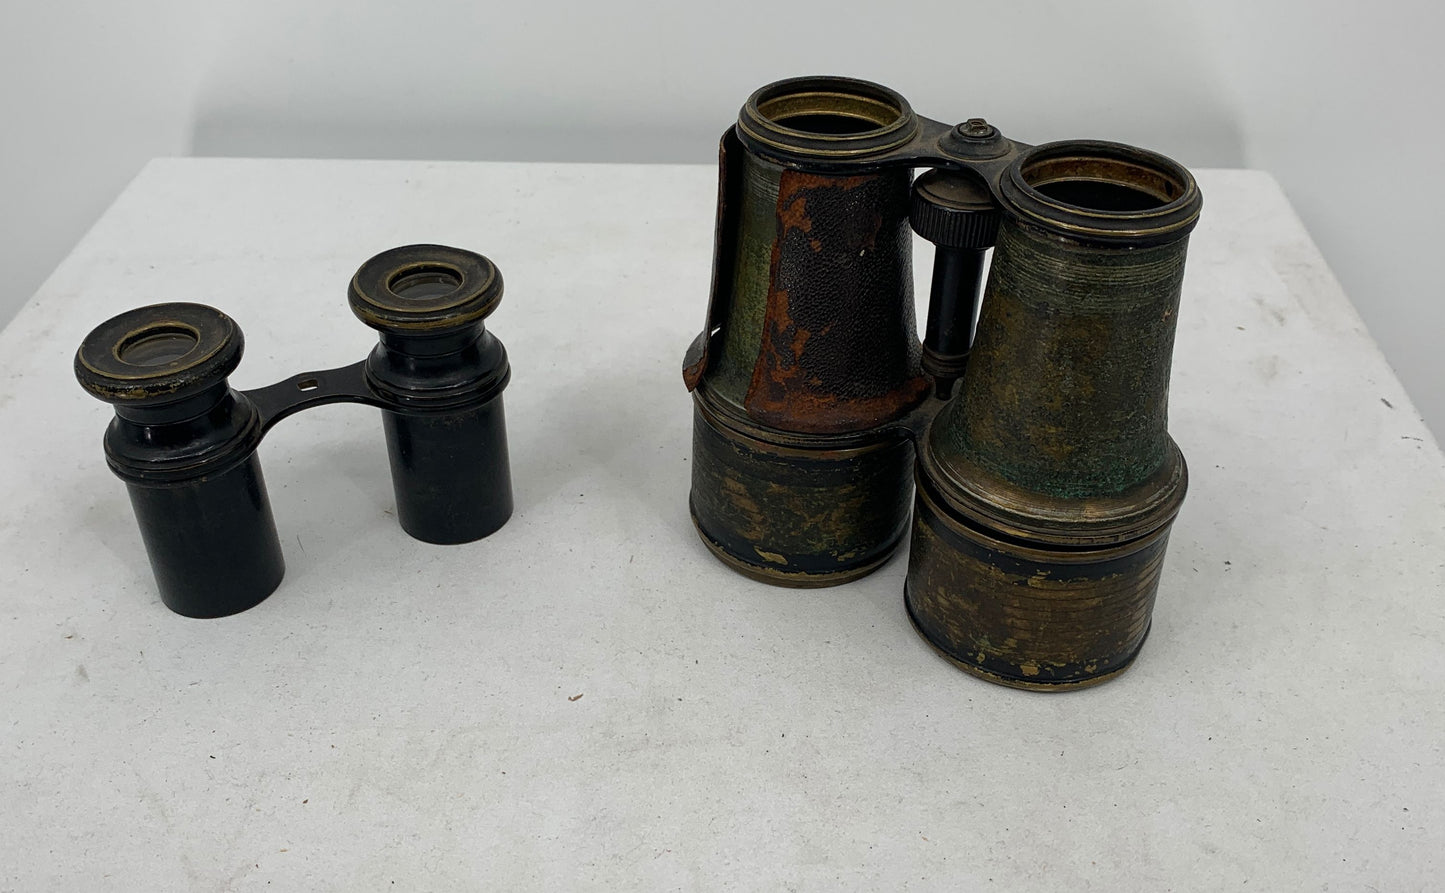 Unknown Antique Wwi Leather Wrapped Binoculars